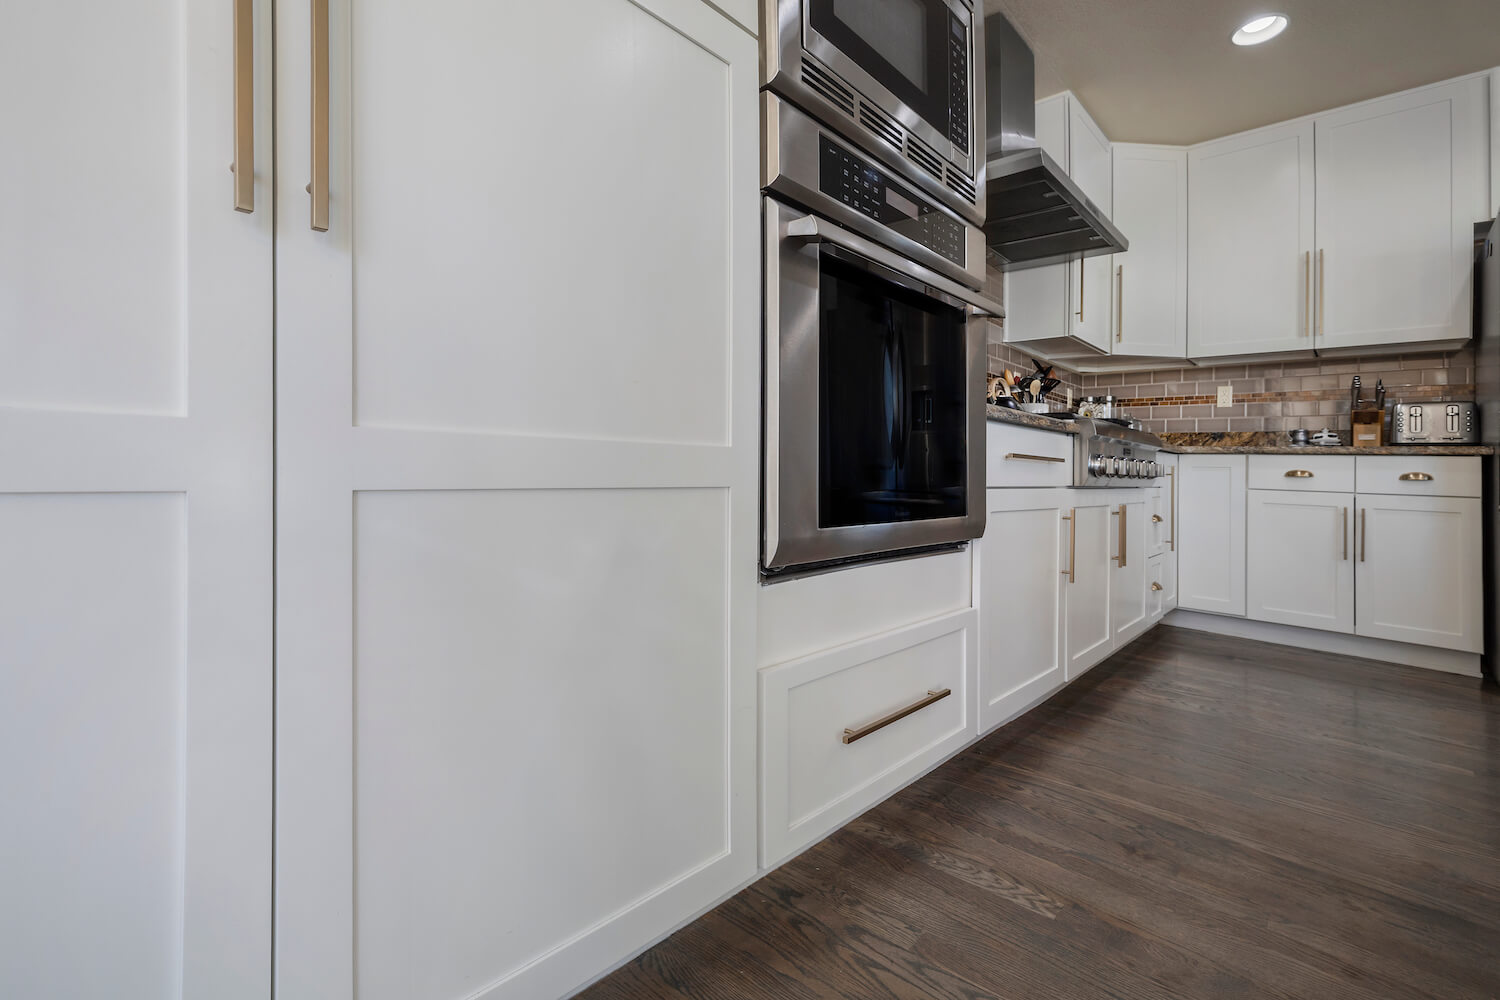 After-refacing kitchen cabinets to shaker style